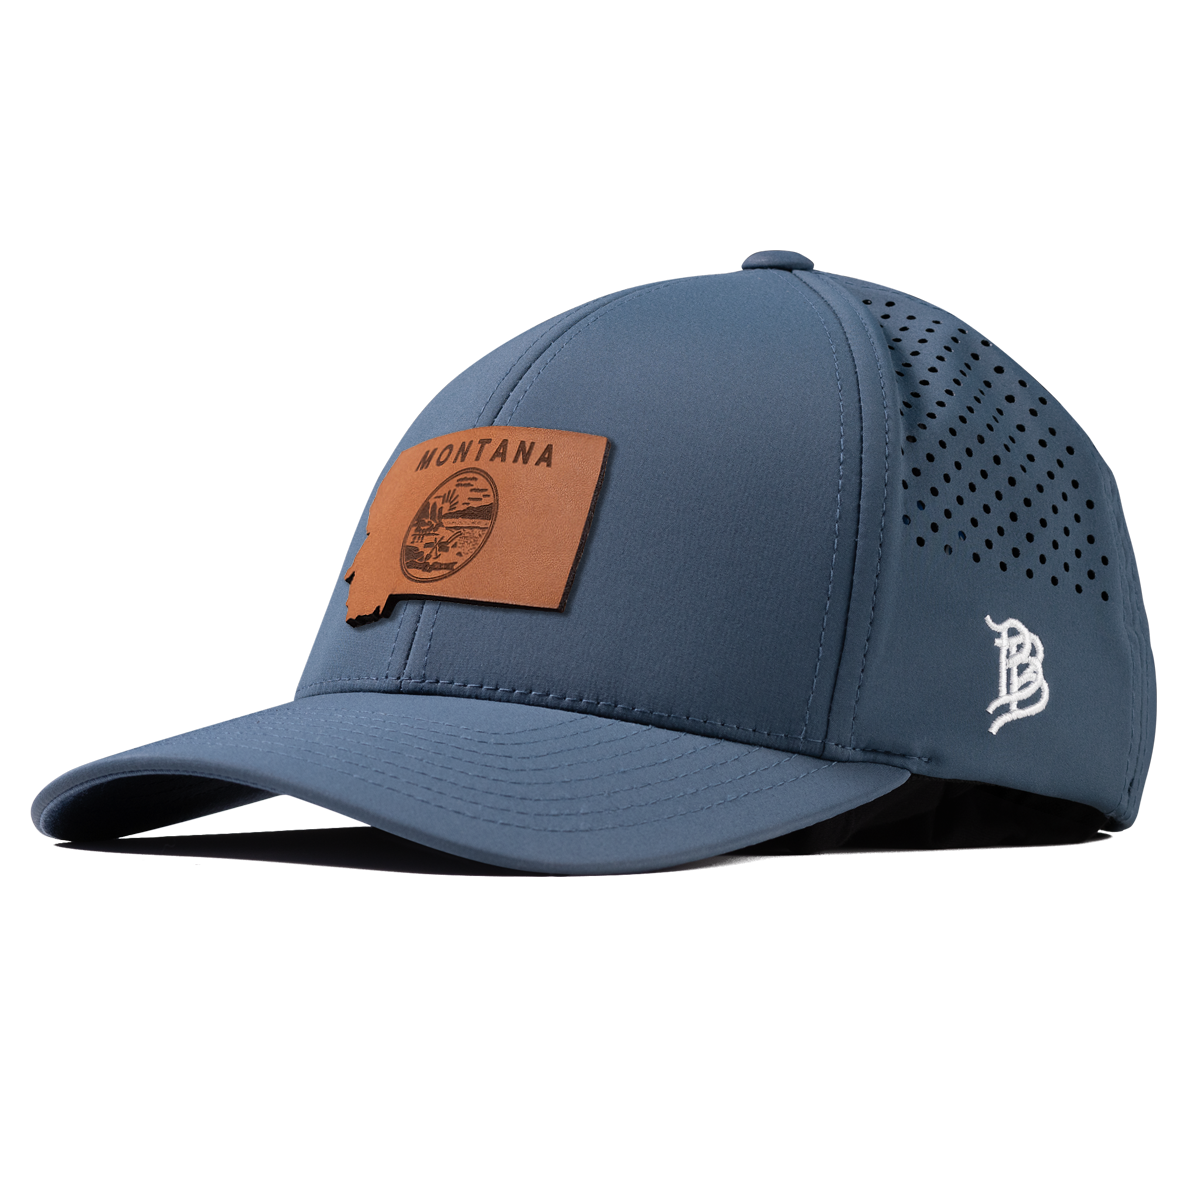 Montana 41 Curved Performance Navy 